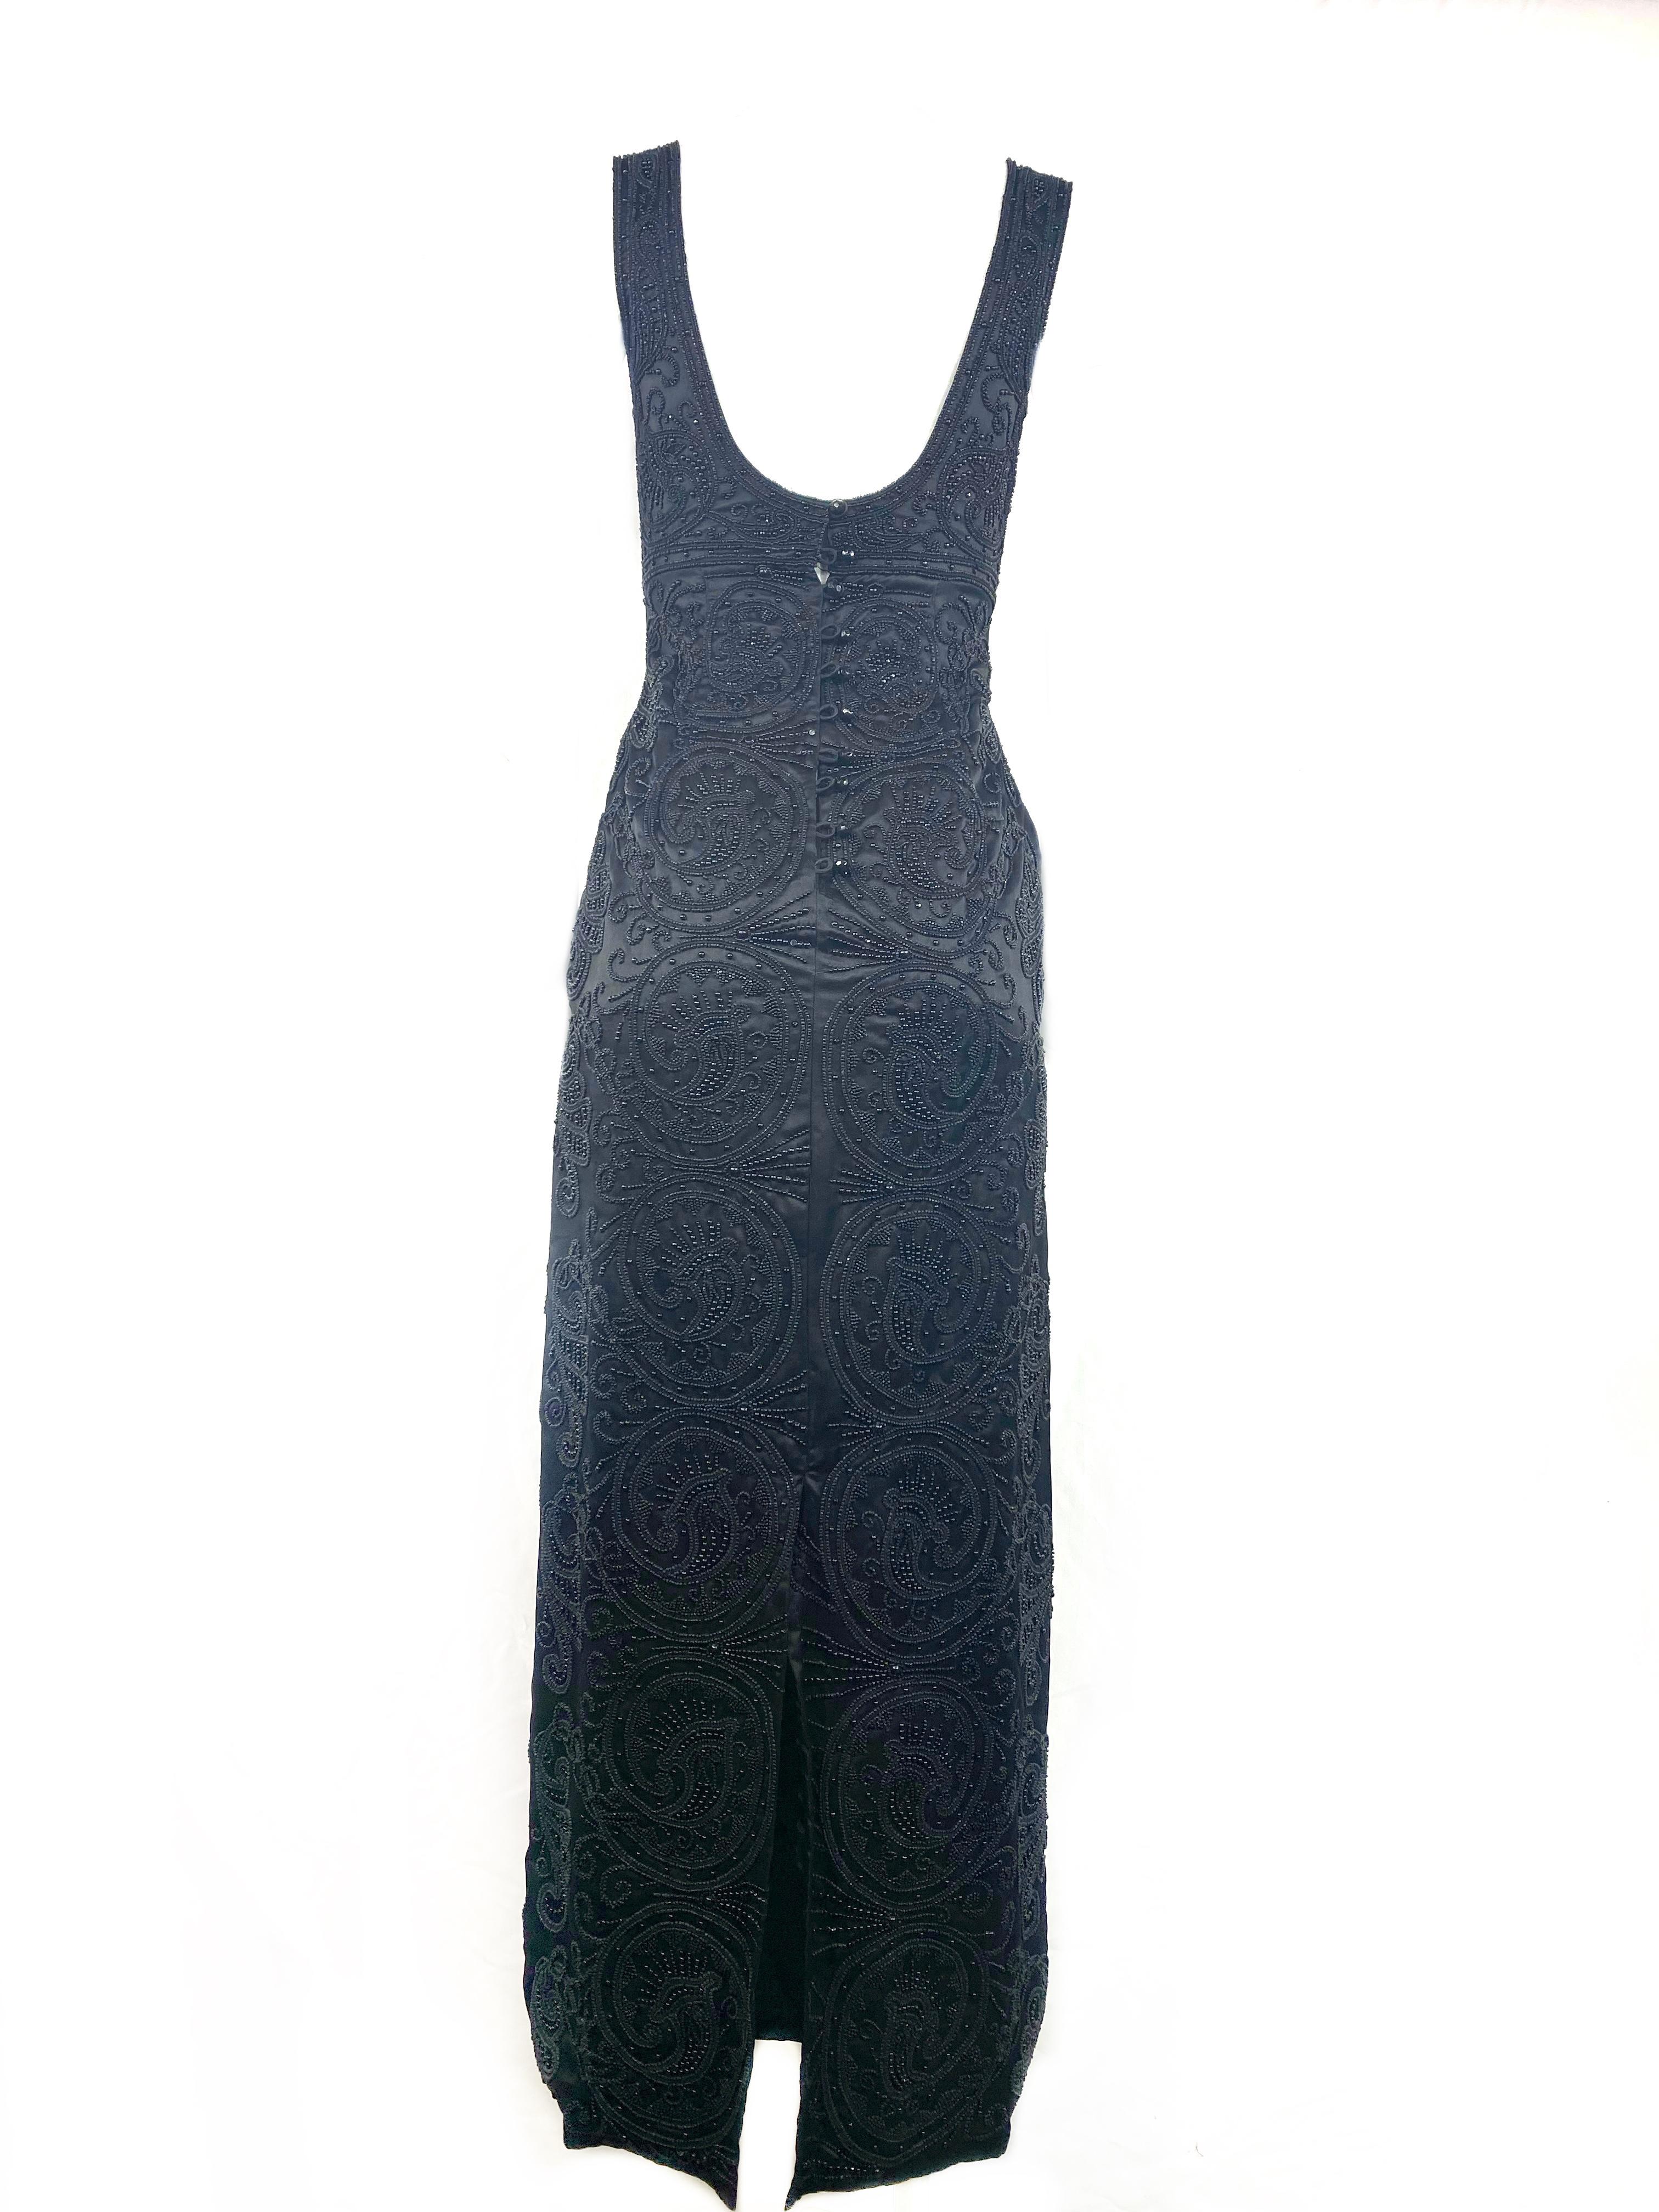 Les Habitudes Black Silk Evening Gown Dress, Size Small In Excellent Condition For Sale In Beverly Hills, CA